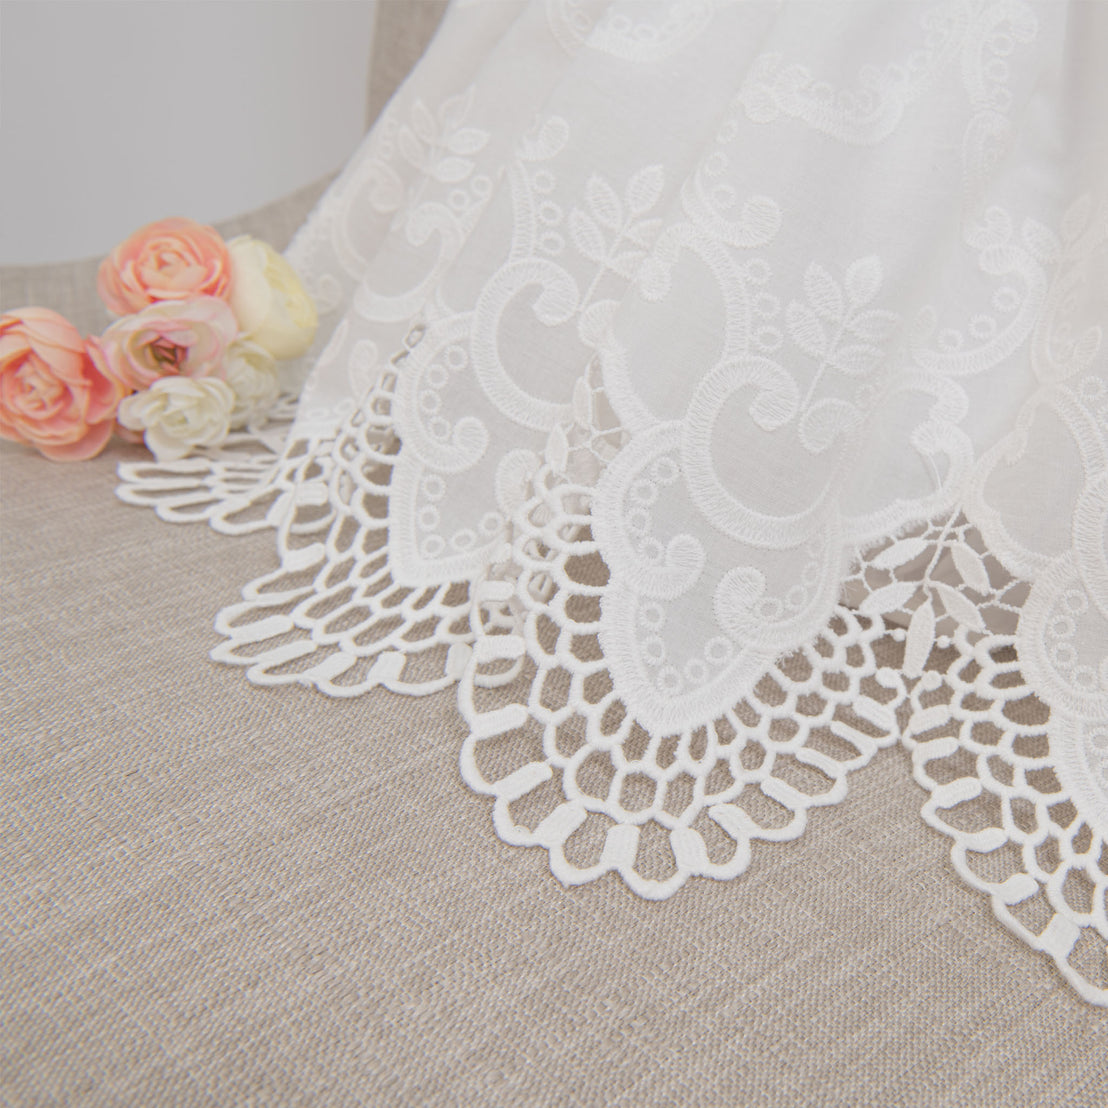 Close-up detail of the scalloped edge cotton lace of the lily christening romper dress skirt